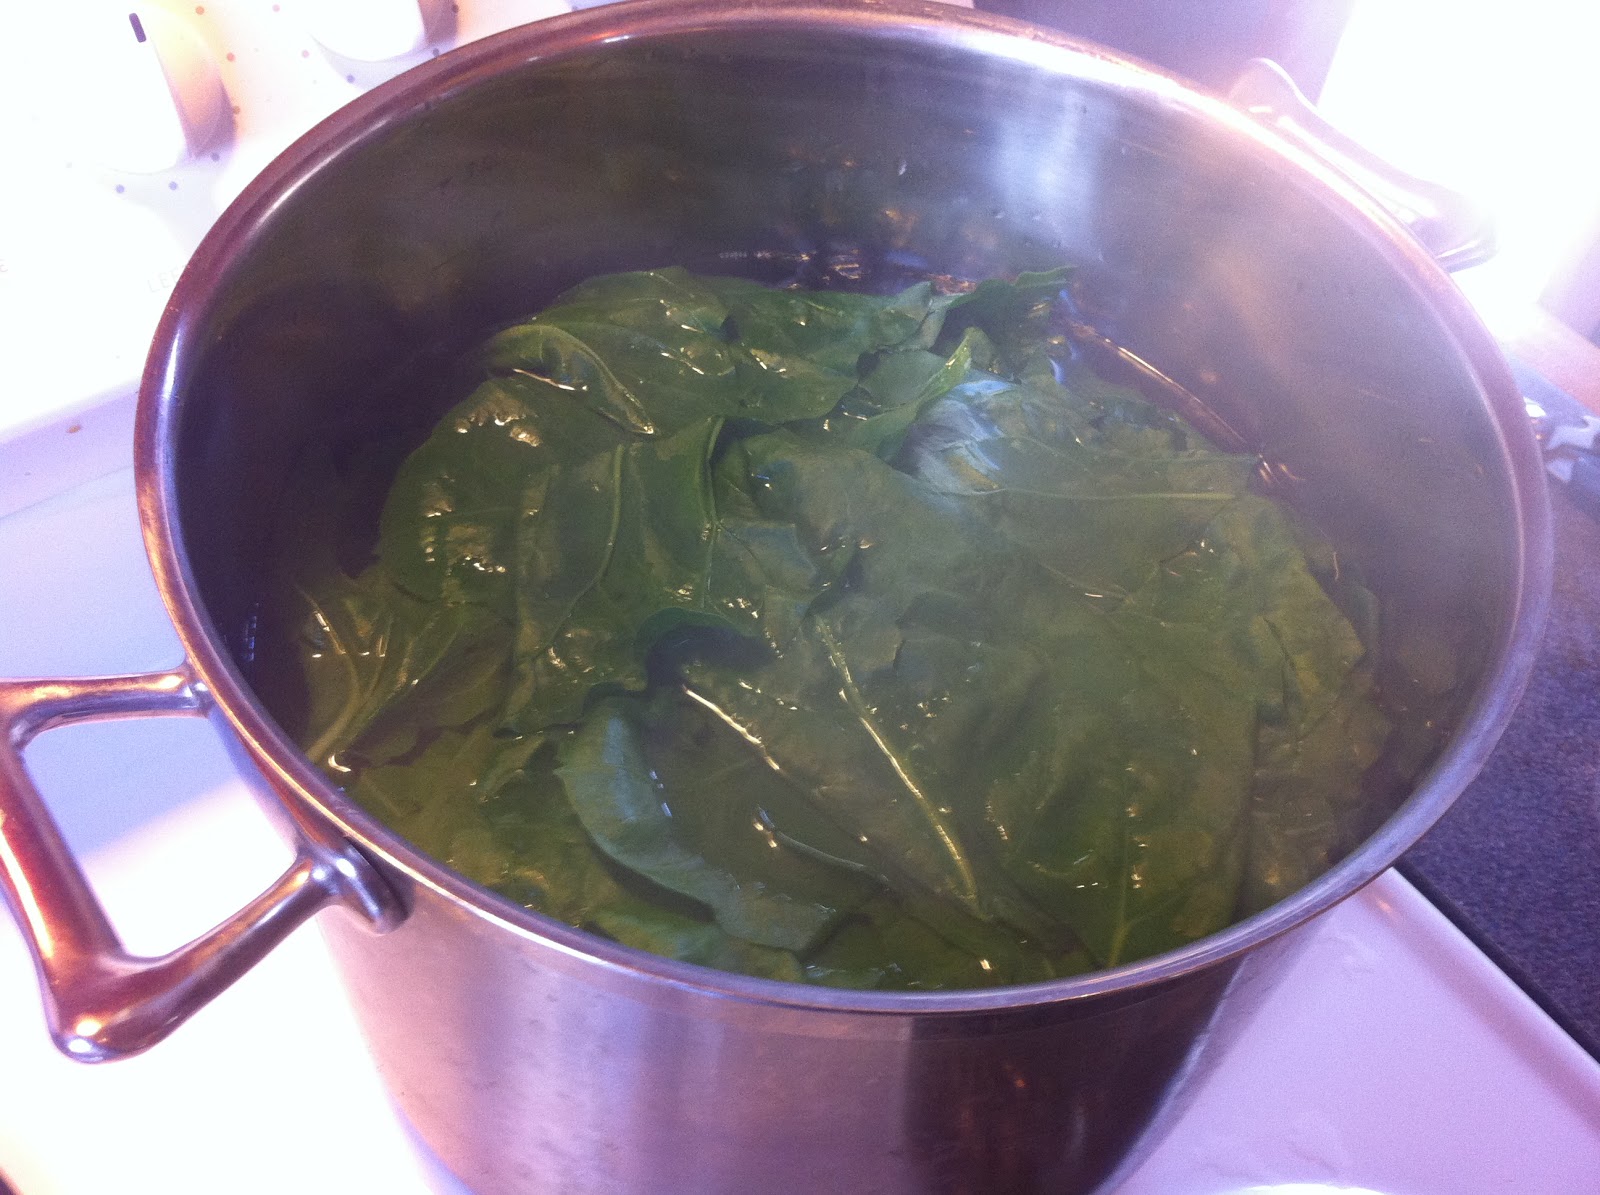 How long do you boil spinach?